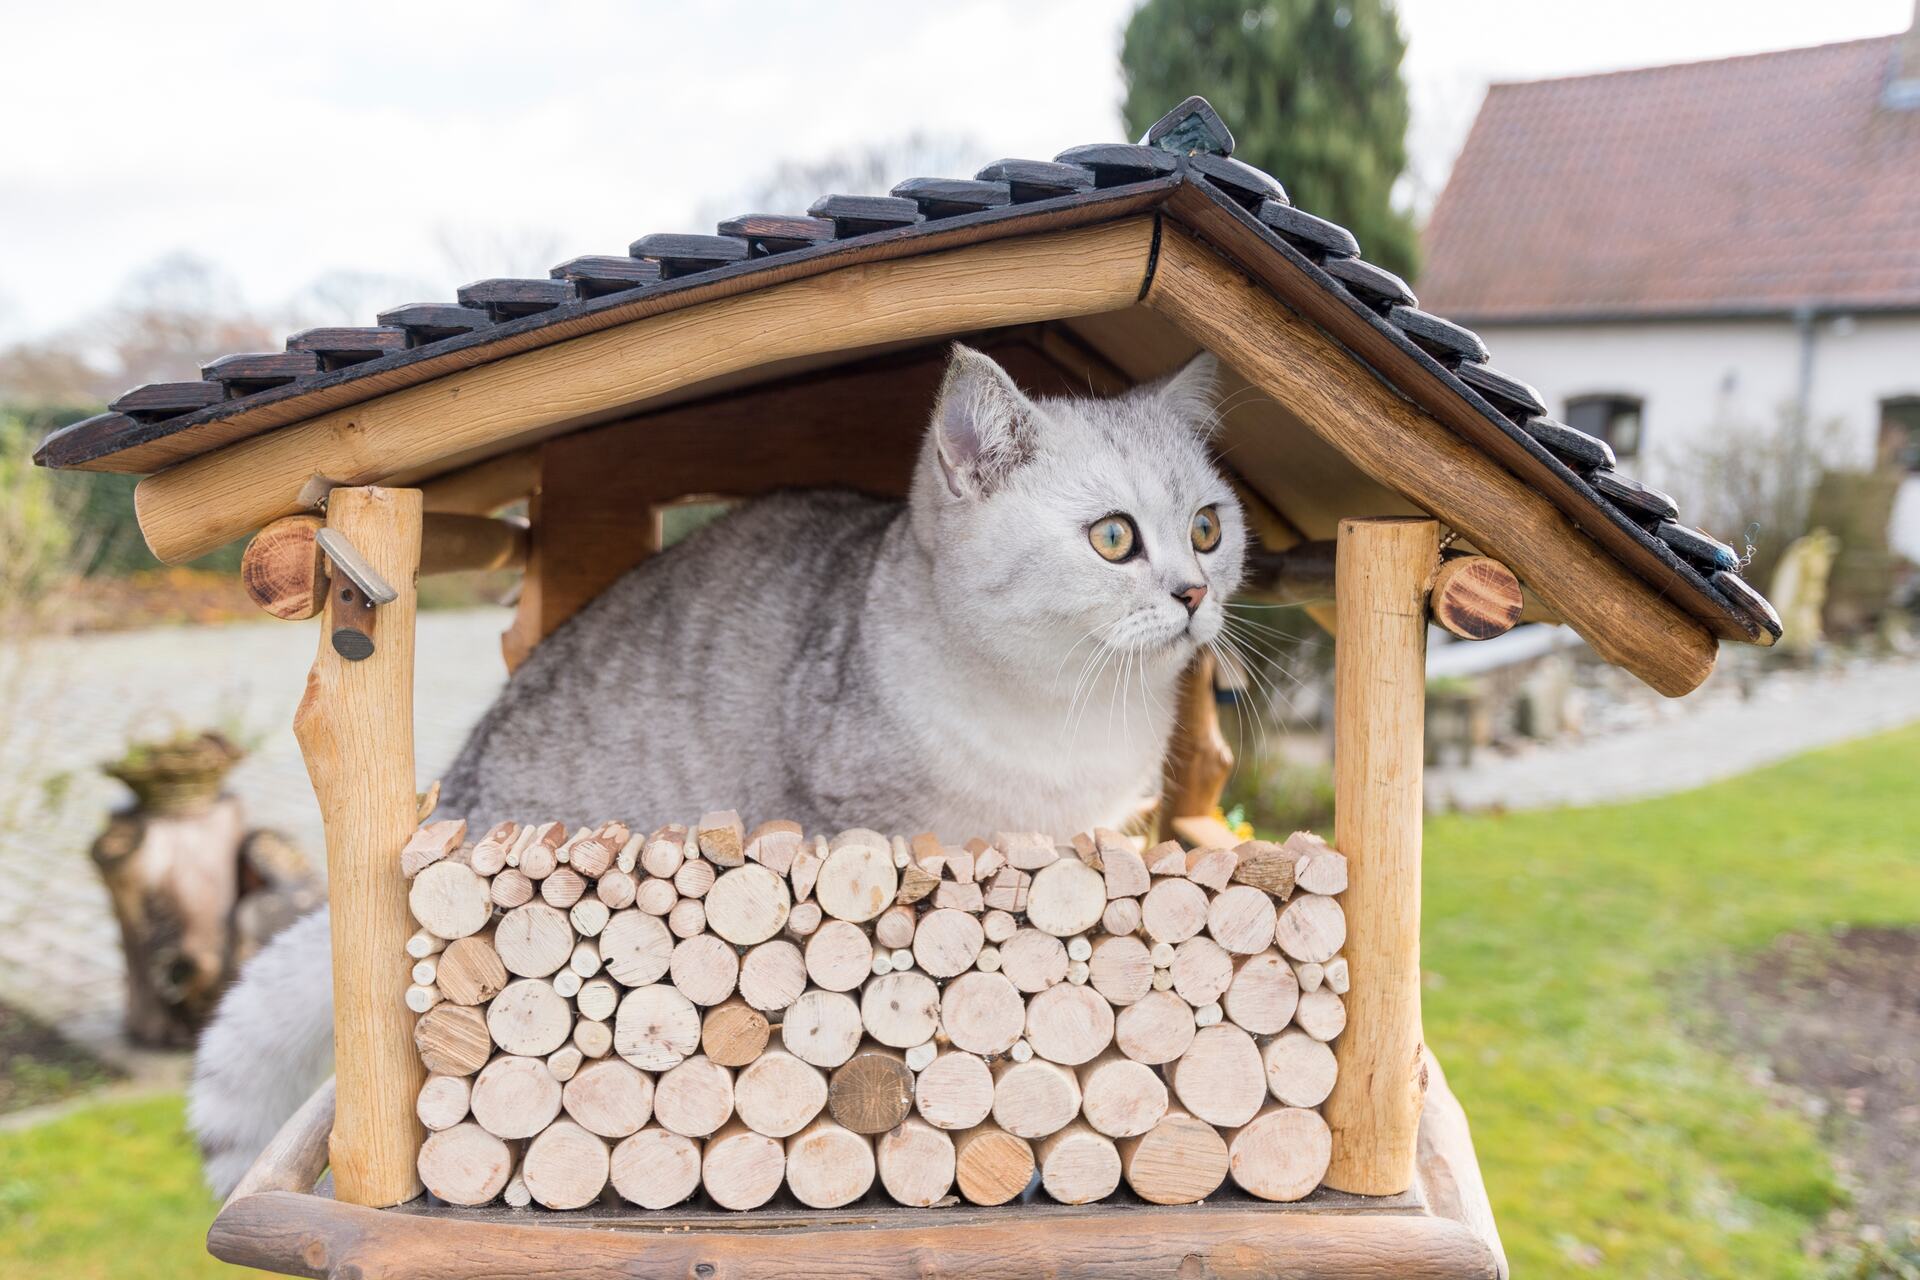 A cat sitting in an outdoor wooden house